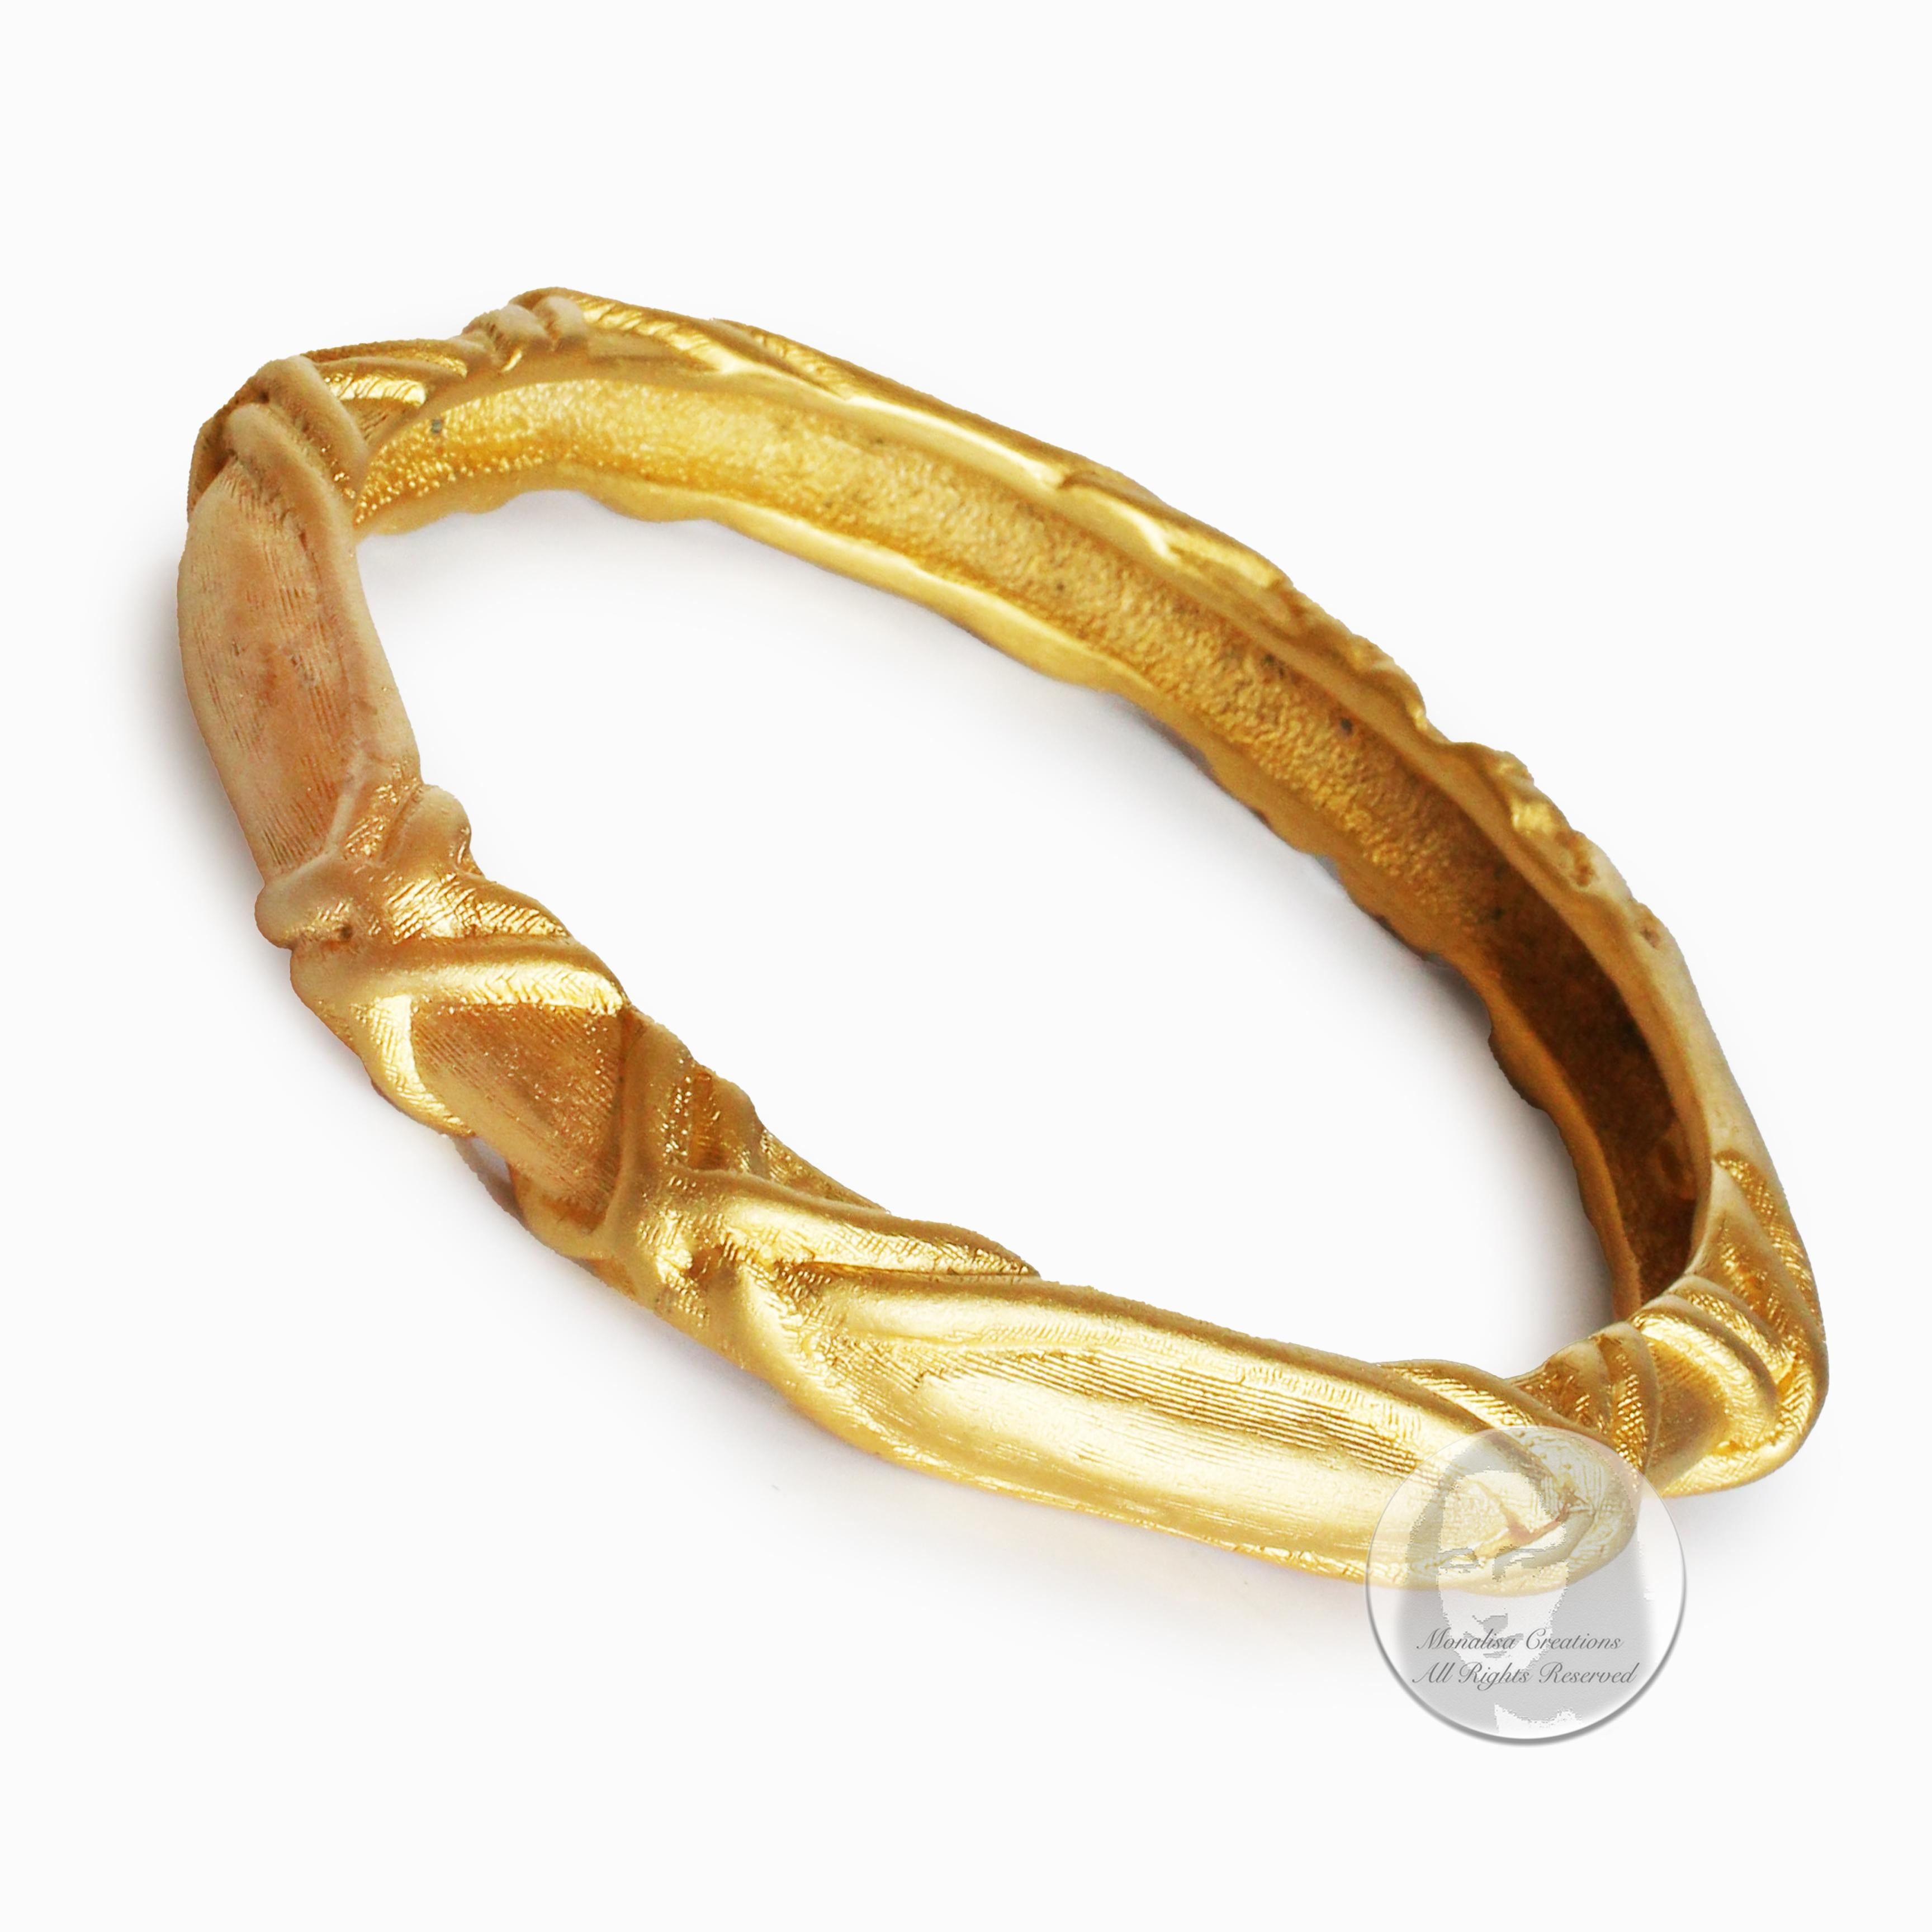 Preowned, vintage Givenchy bangle bracelet, most likely made in the 80s.  Made from gold metal, this bangle features an abstract cross pattern throughout.  

Looks amazing as it is - or pair it with your other favorite bangles! The abstract texture